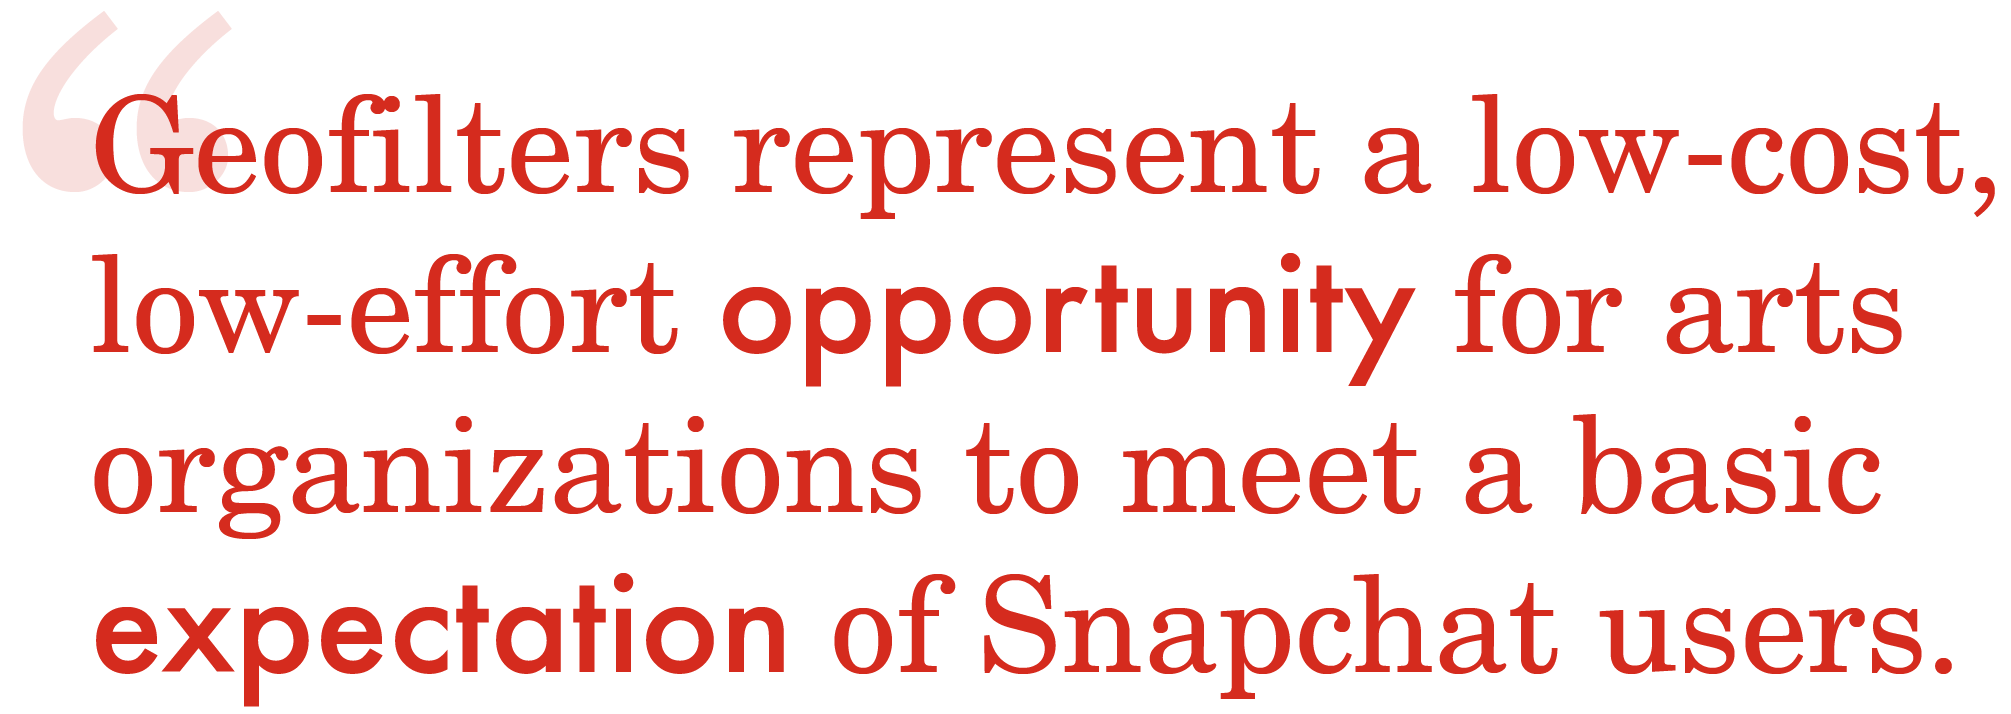 Oh_Snap_What_Arts_Marketers_Need_to_Know_About_Snapchat-06